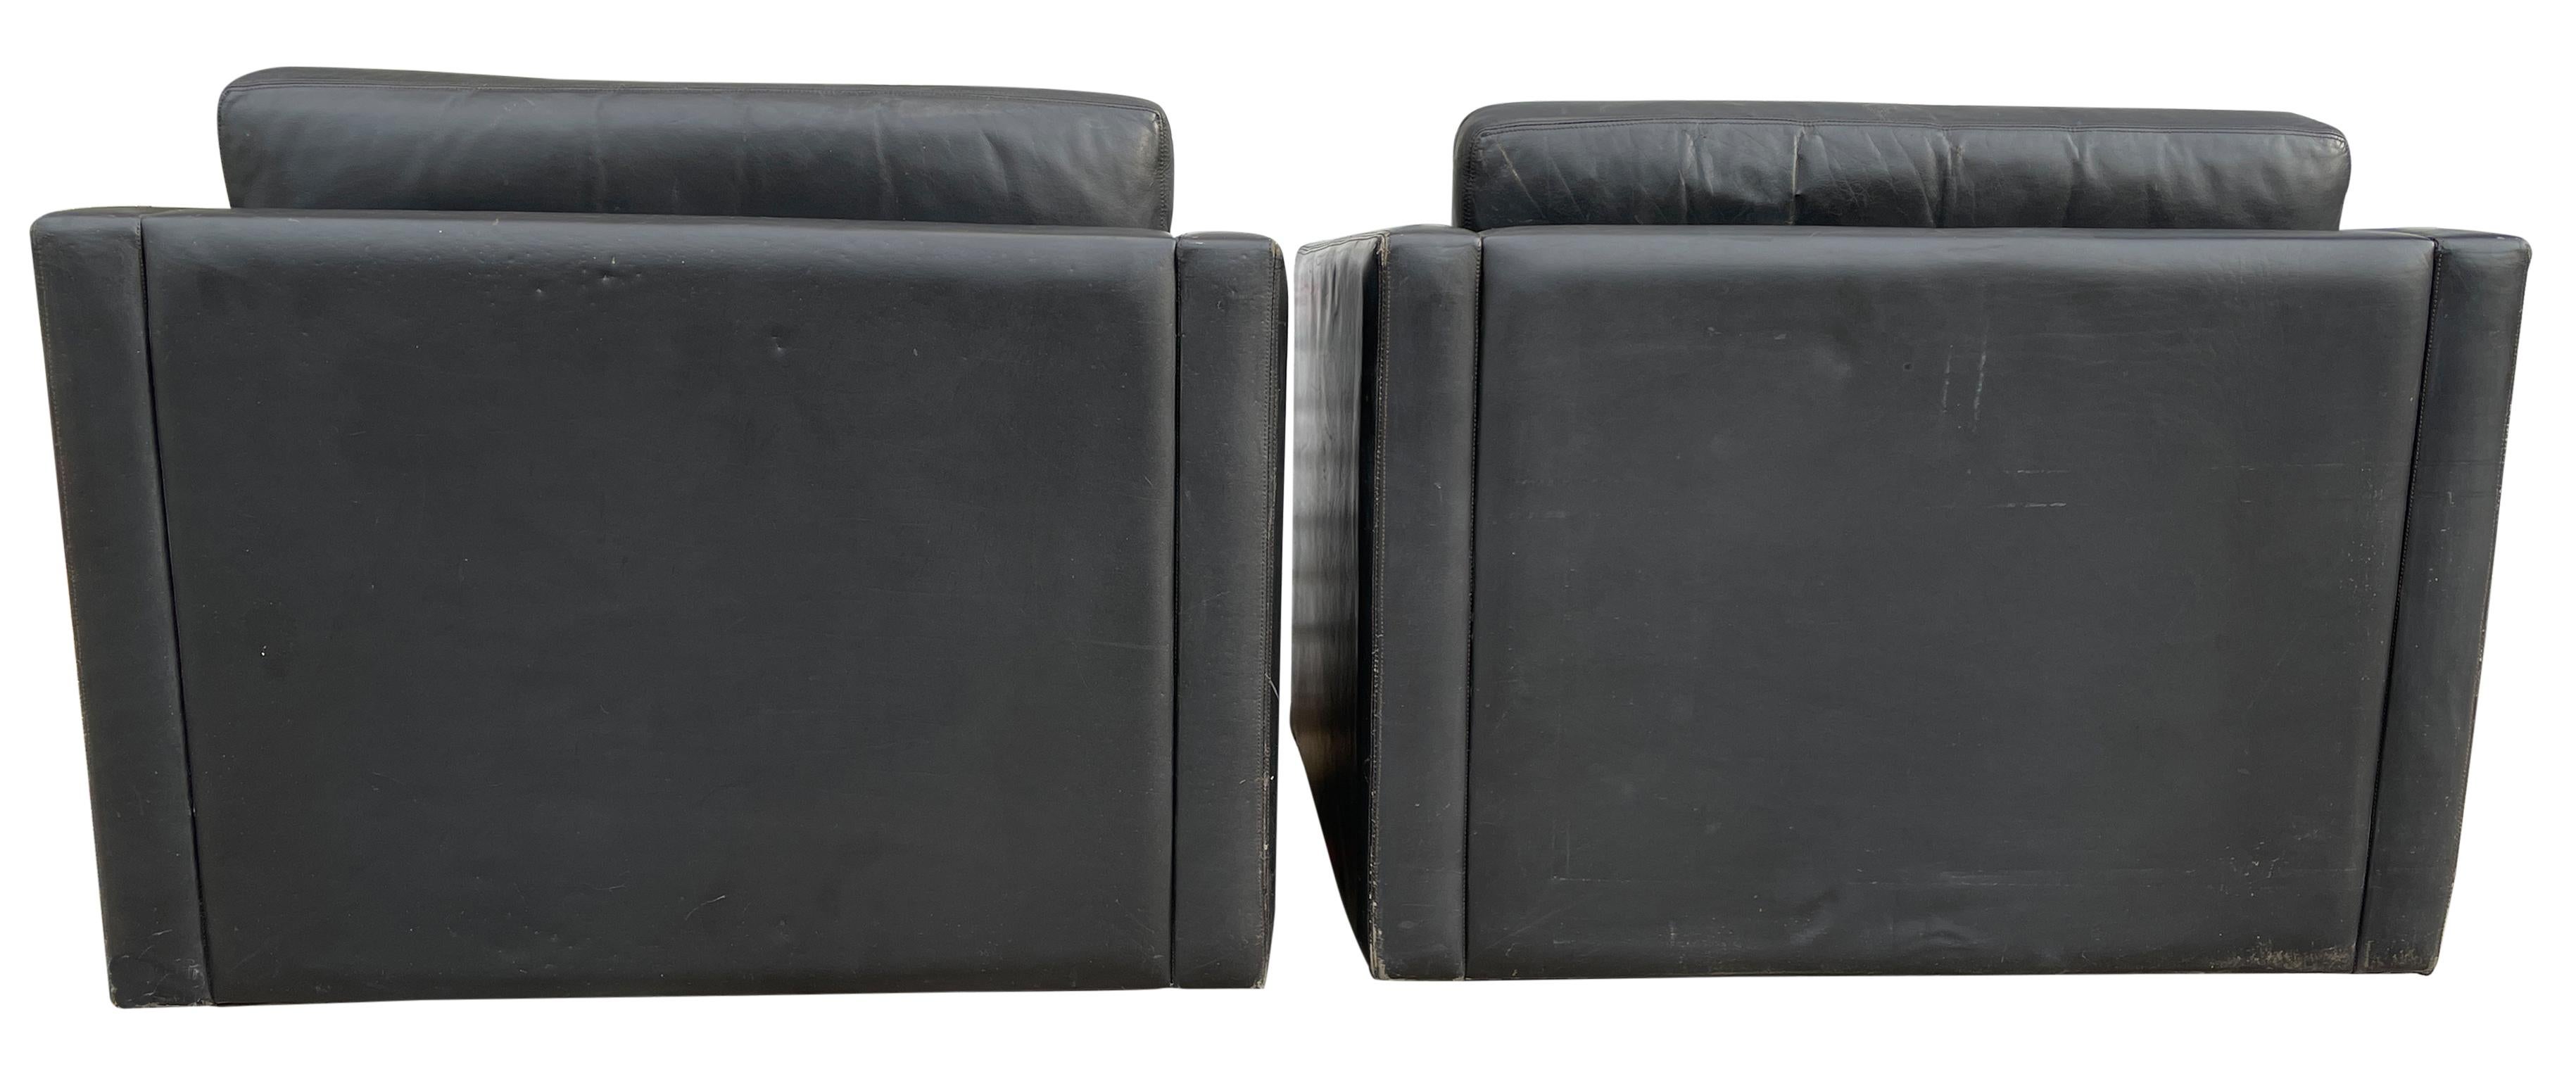 Mid-Century Modern Pfister Cube Lounge Chairs for Knoll in Black Leather For Sale 1